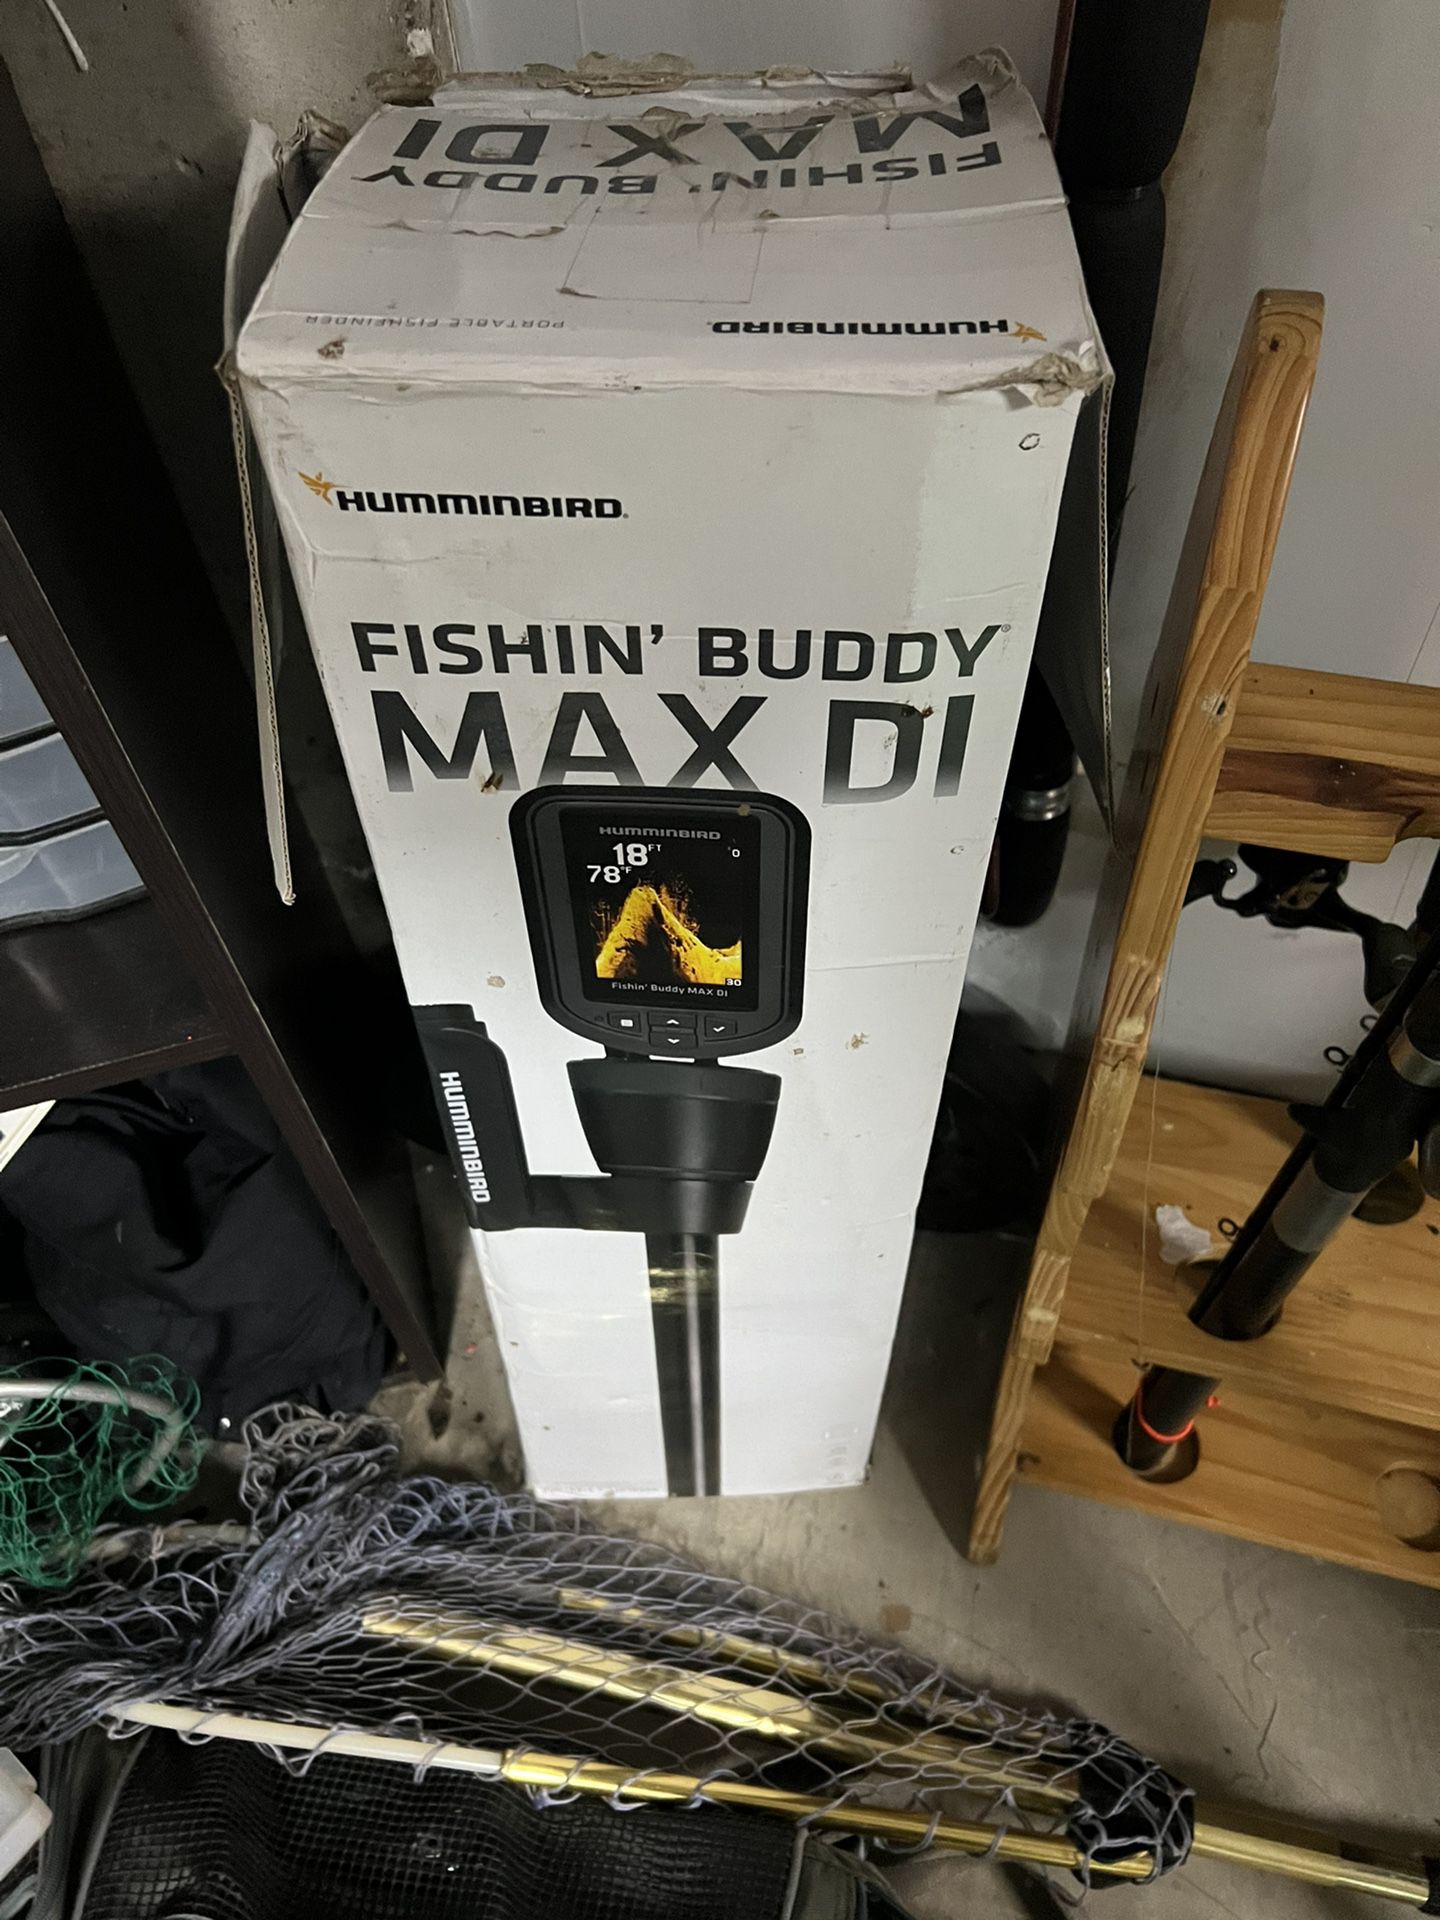 Fishing Buddy Fish Finder Max Di for Sale in Portland, OR - OfferUp